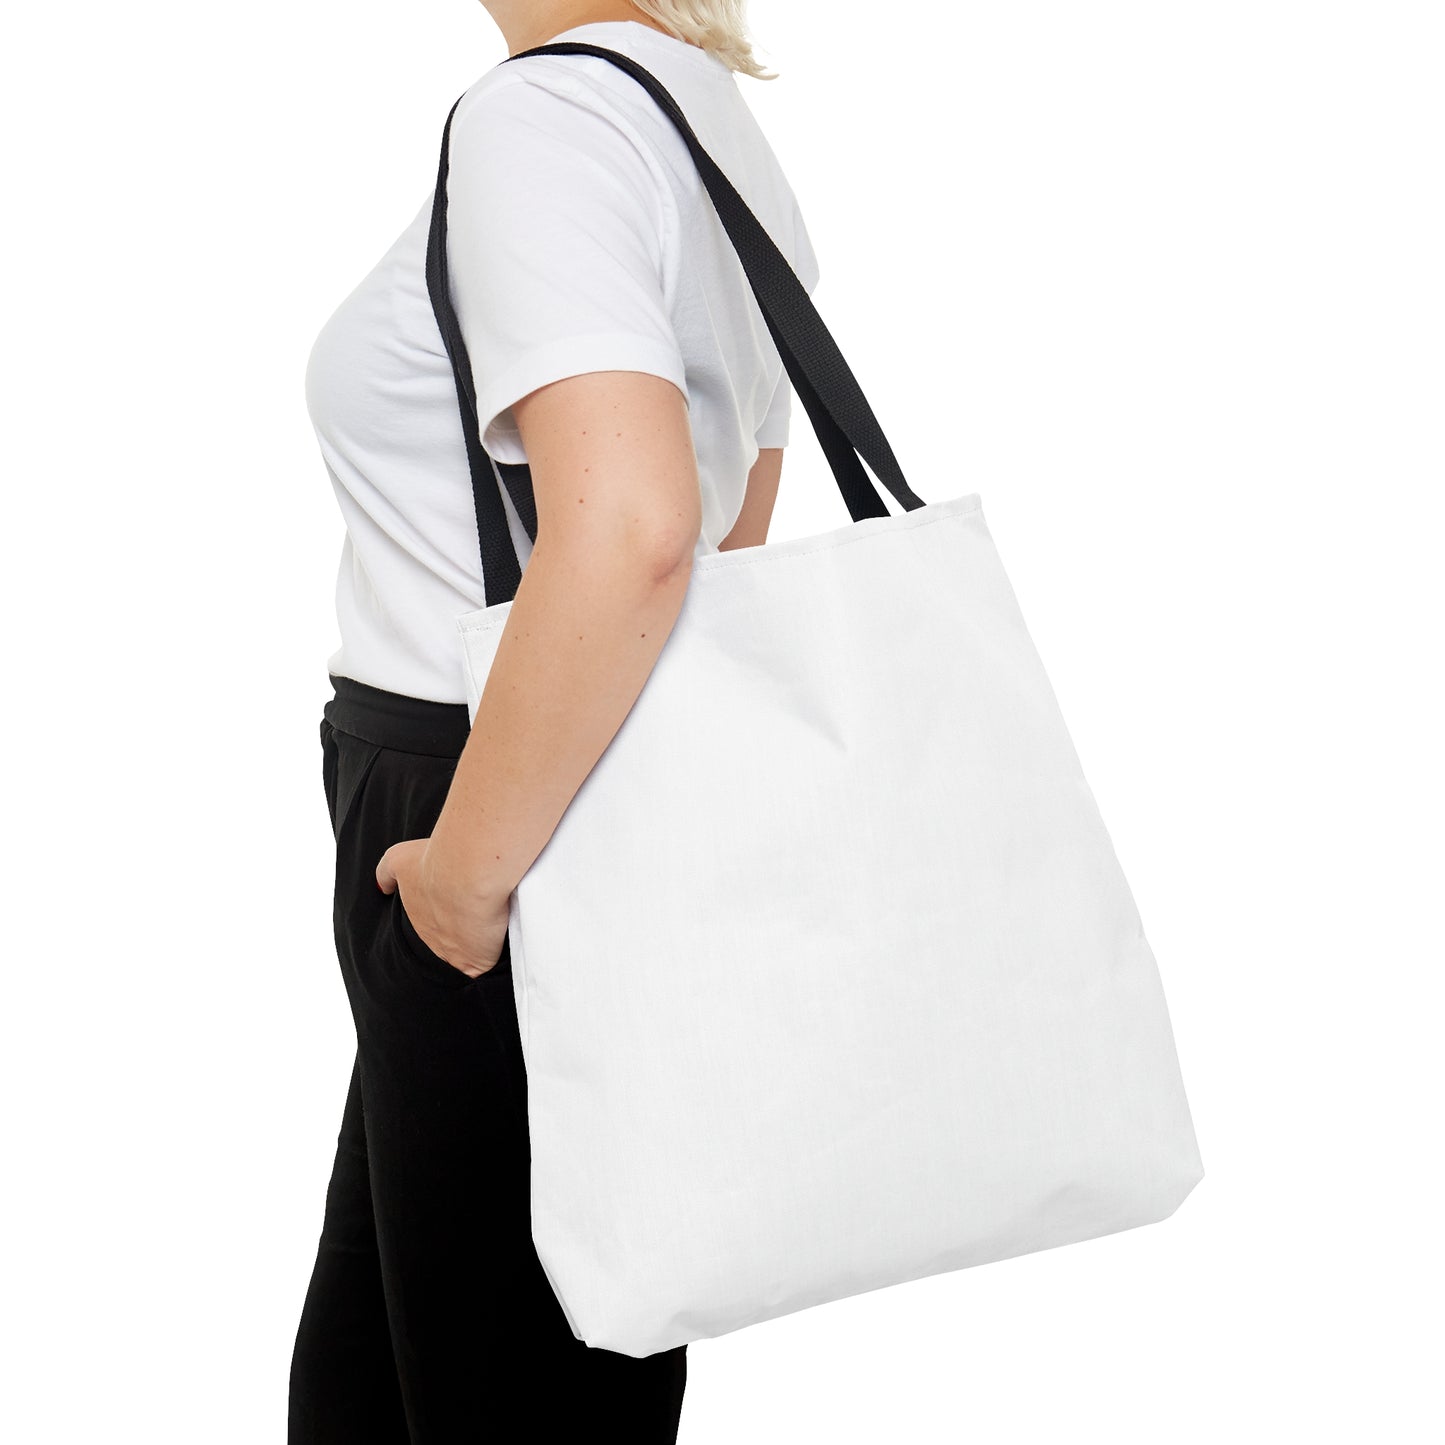 Personalized Design High-Quality Tote Bag